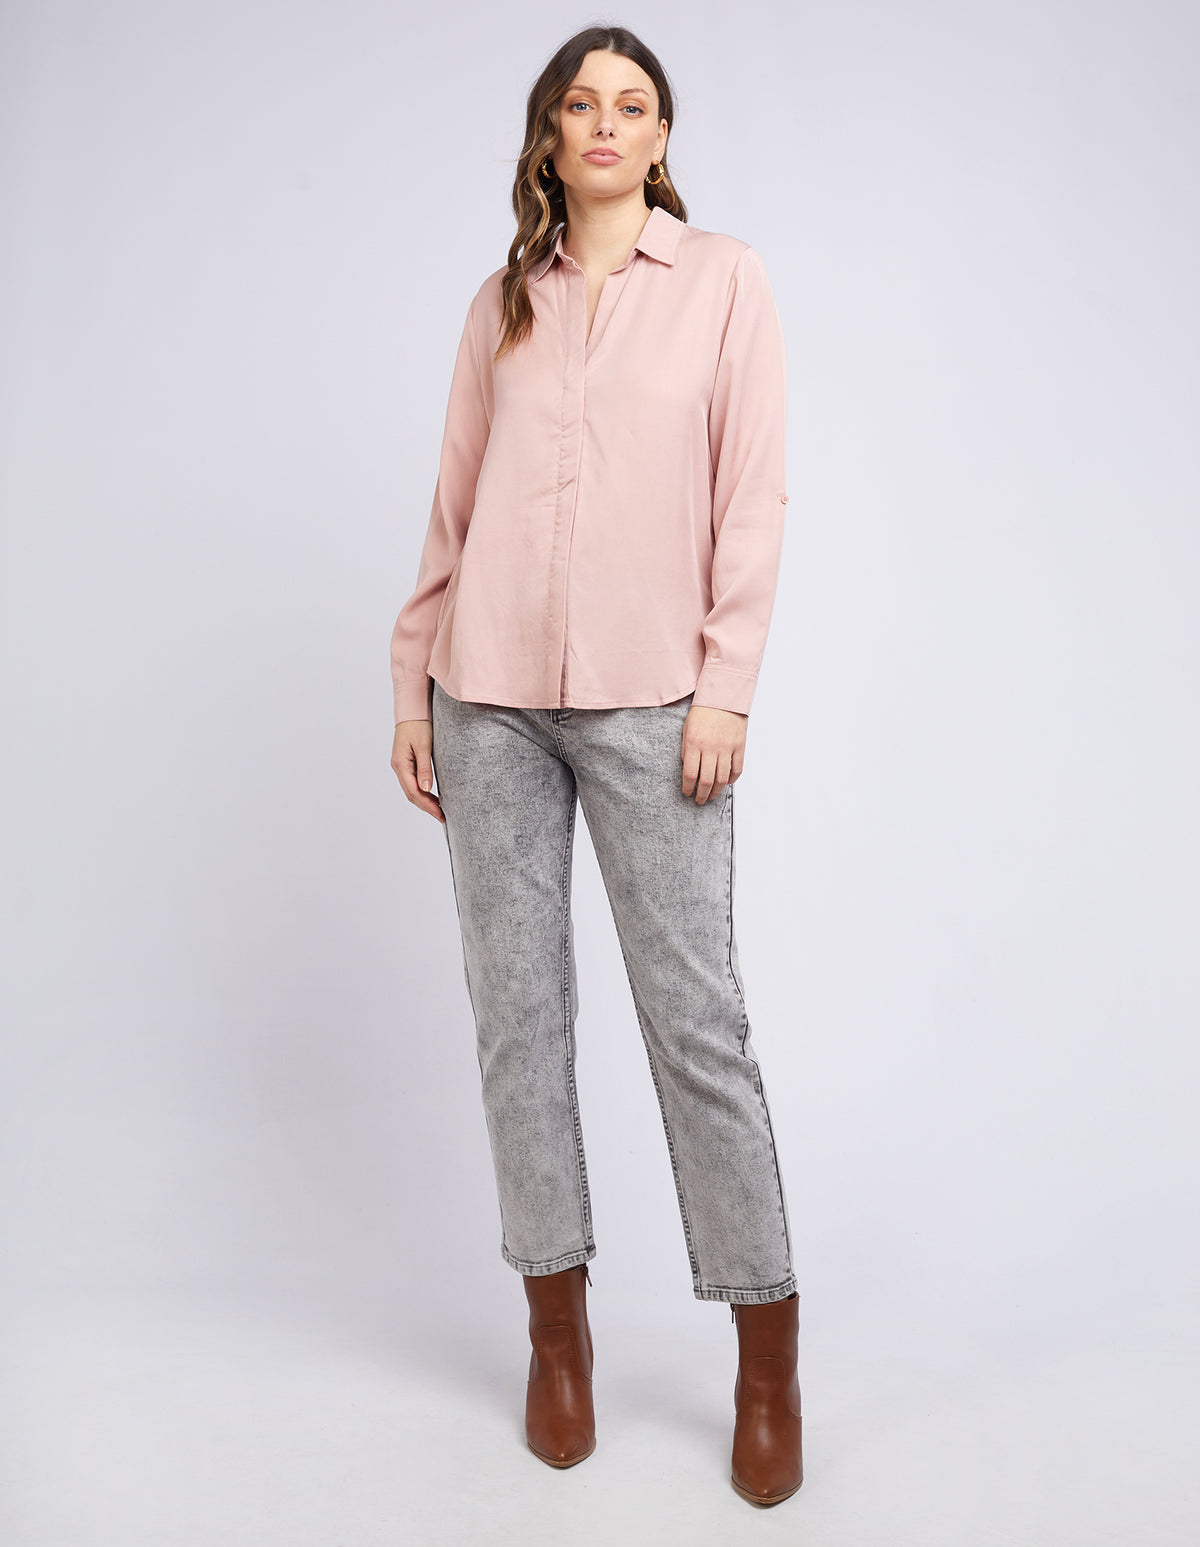 Elodie Shirt - Soft Pink - Foxwood - FUDGE Gifts Home Lifestyle